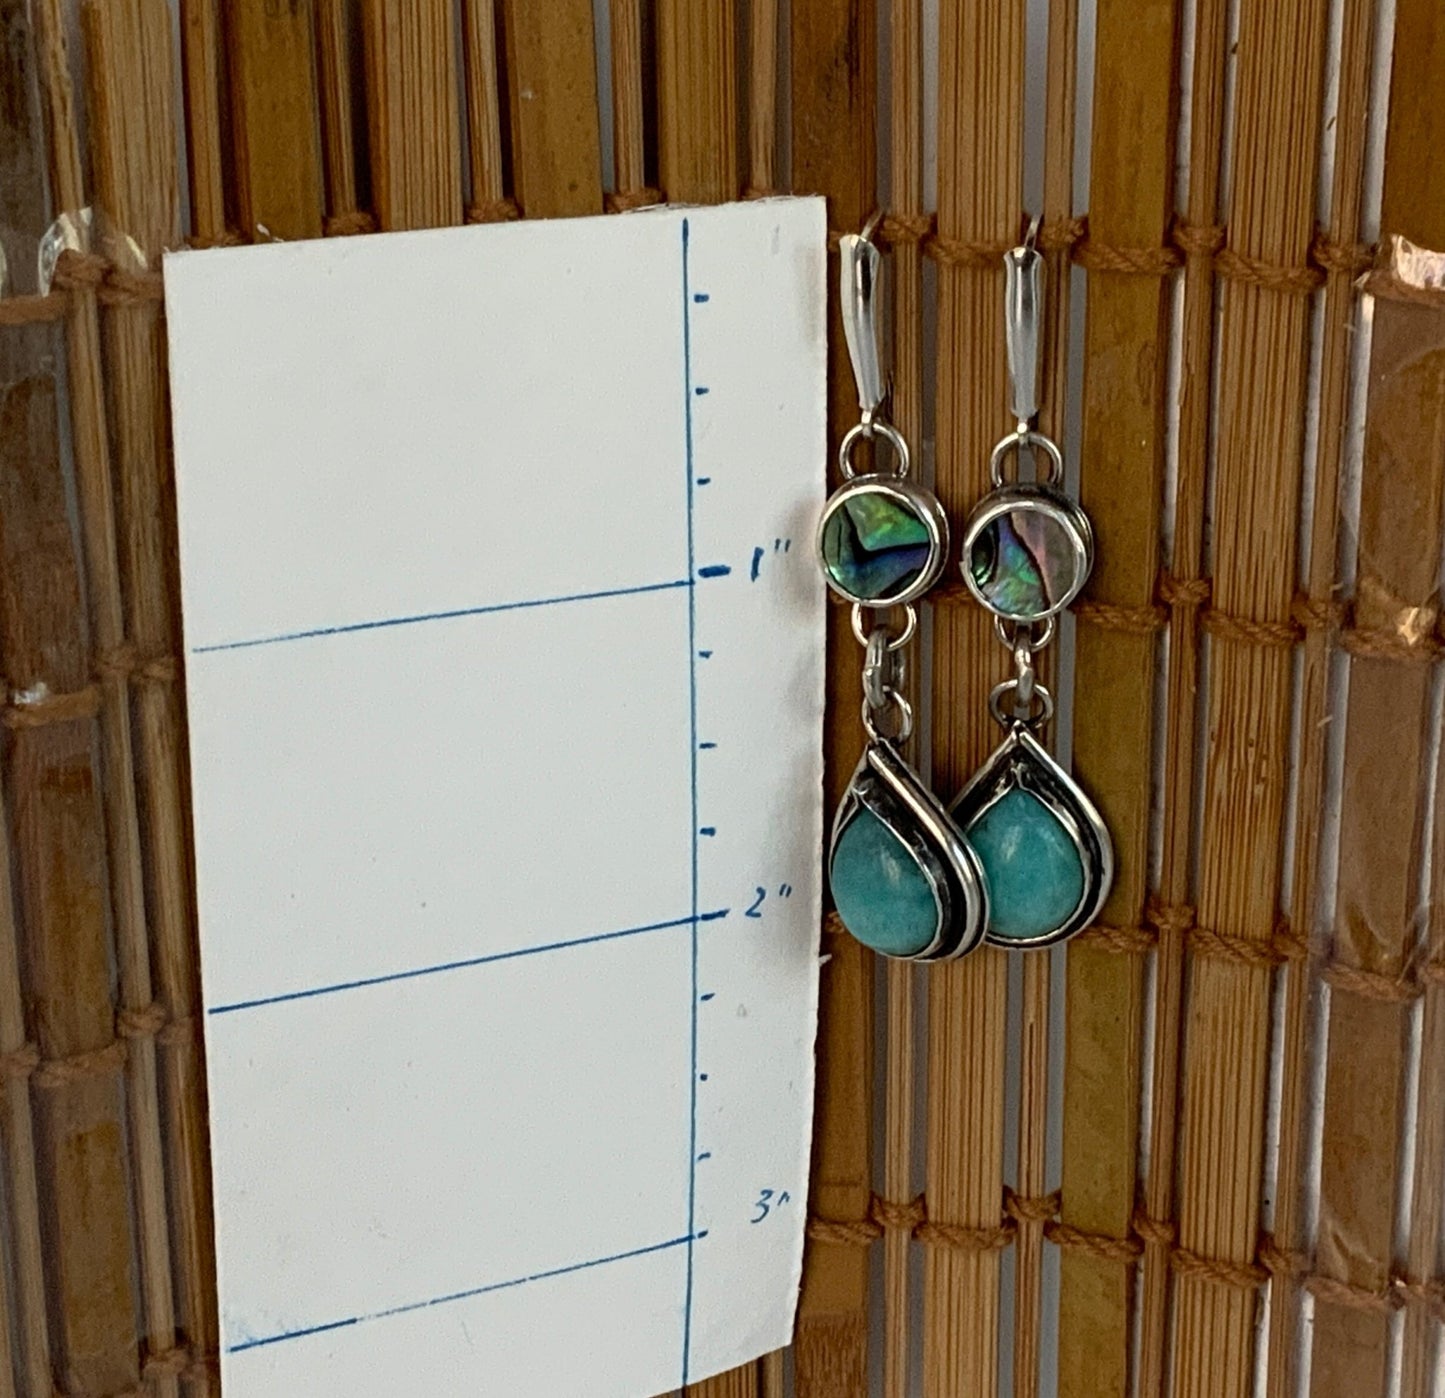 Amazonite and Abalone Drop Dangle Sterling Silver Earrings - Evitts Creek Arts